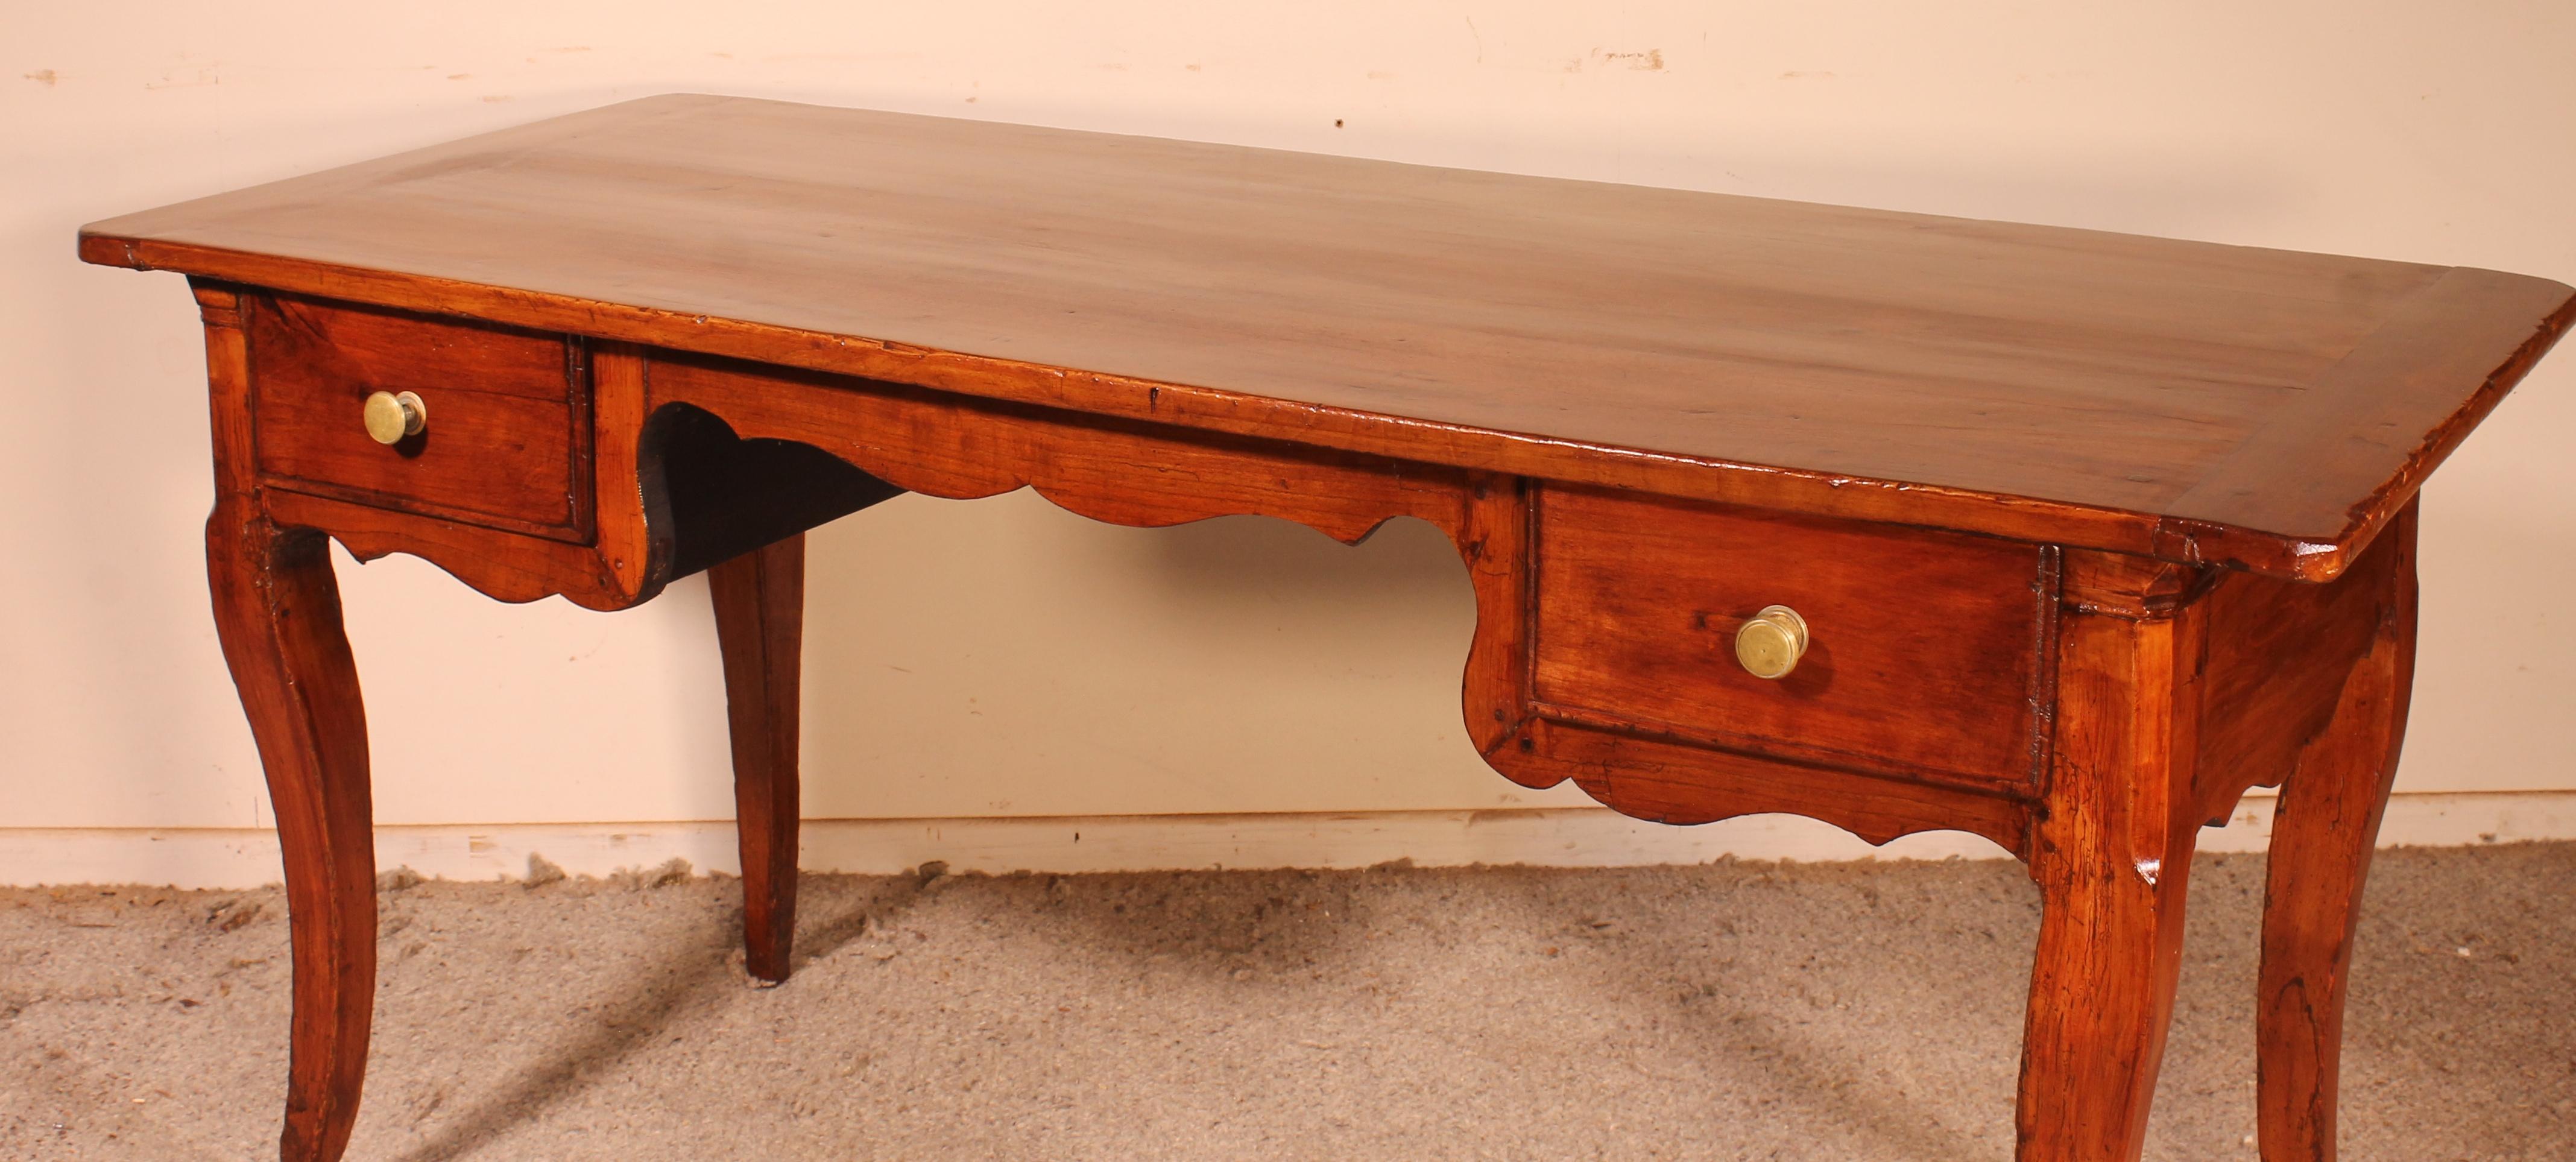 Mahogany Louis XV Desk in Cherry Early 19th Century For Sale